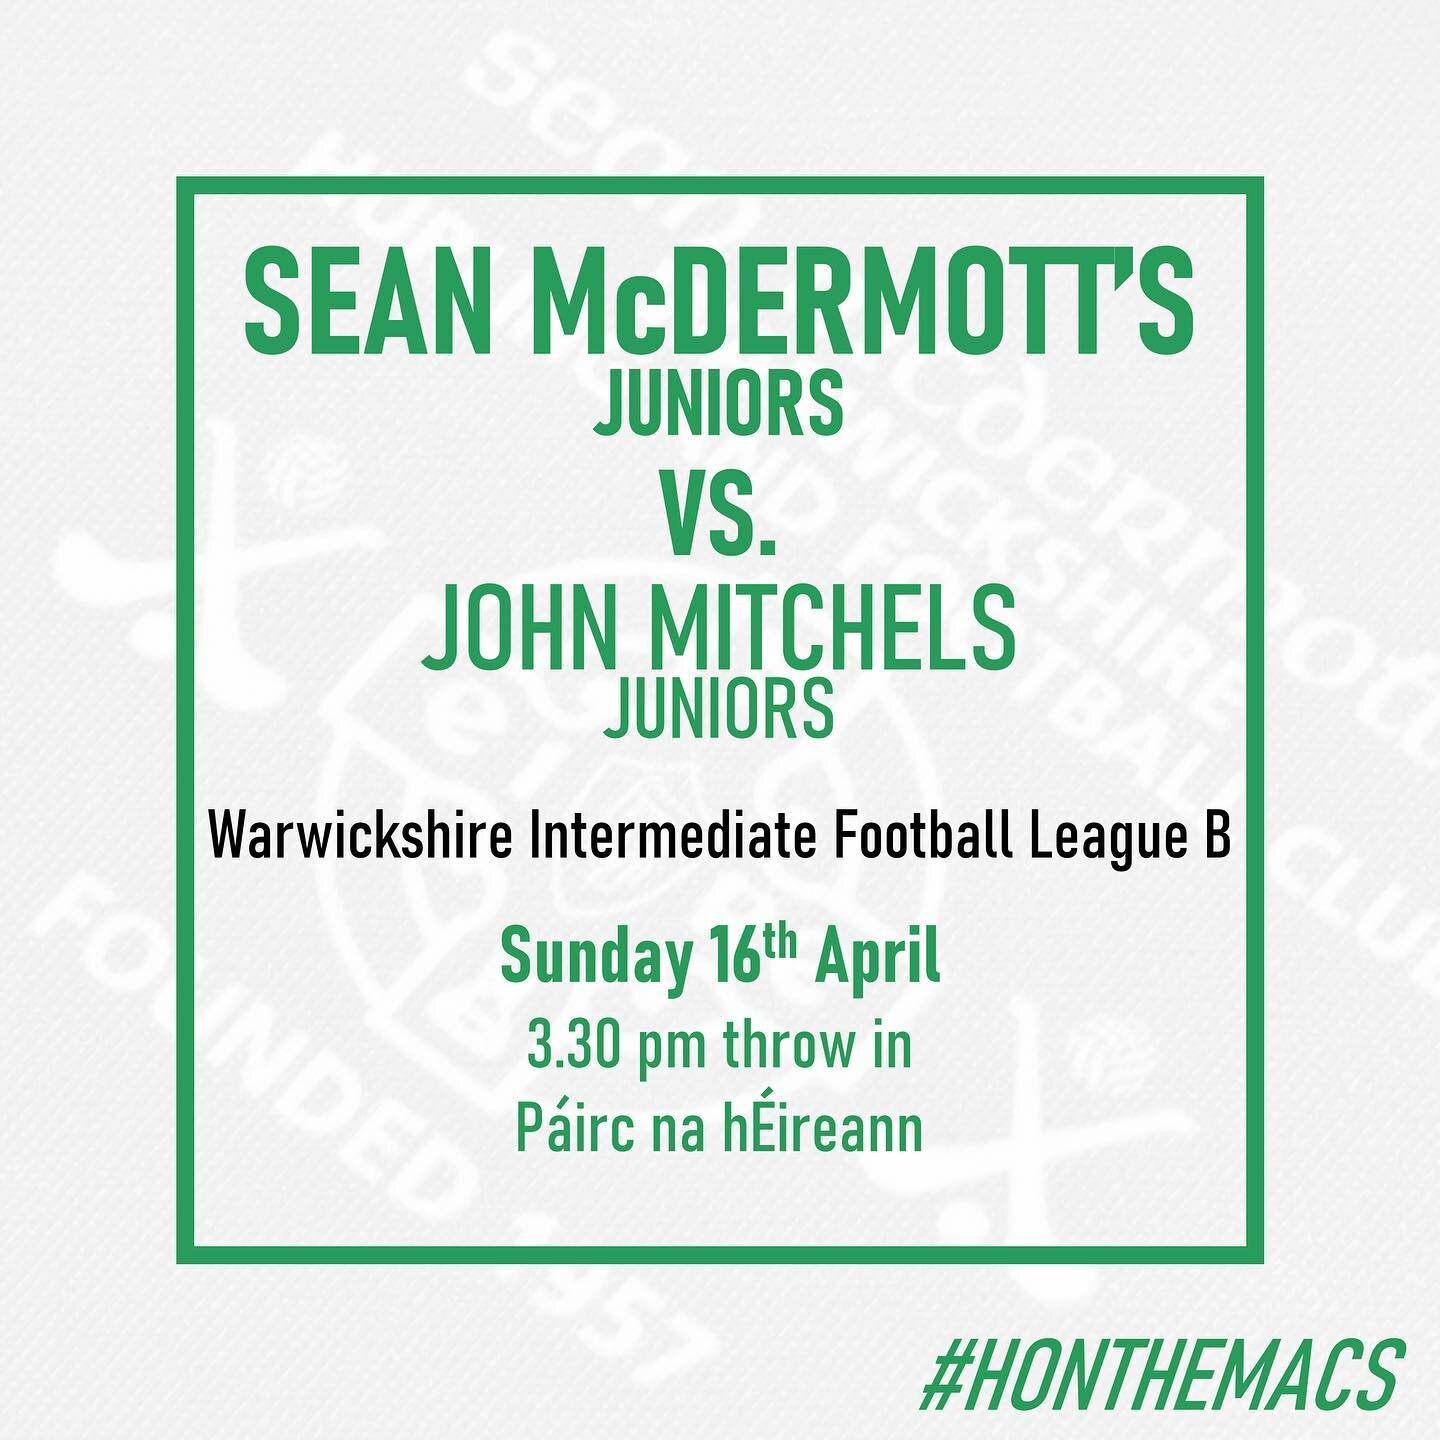 Our juniors continue their league campaign tomorrow afternoon against John Mitchels, a 3.30pm throw in at P&aacute;irc na h&Eacute;ireann.

#honthemacs